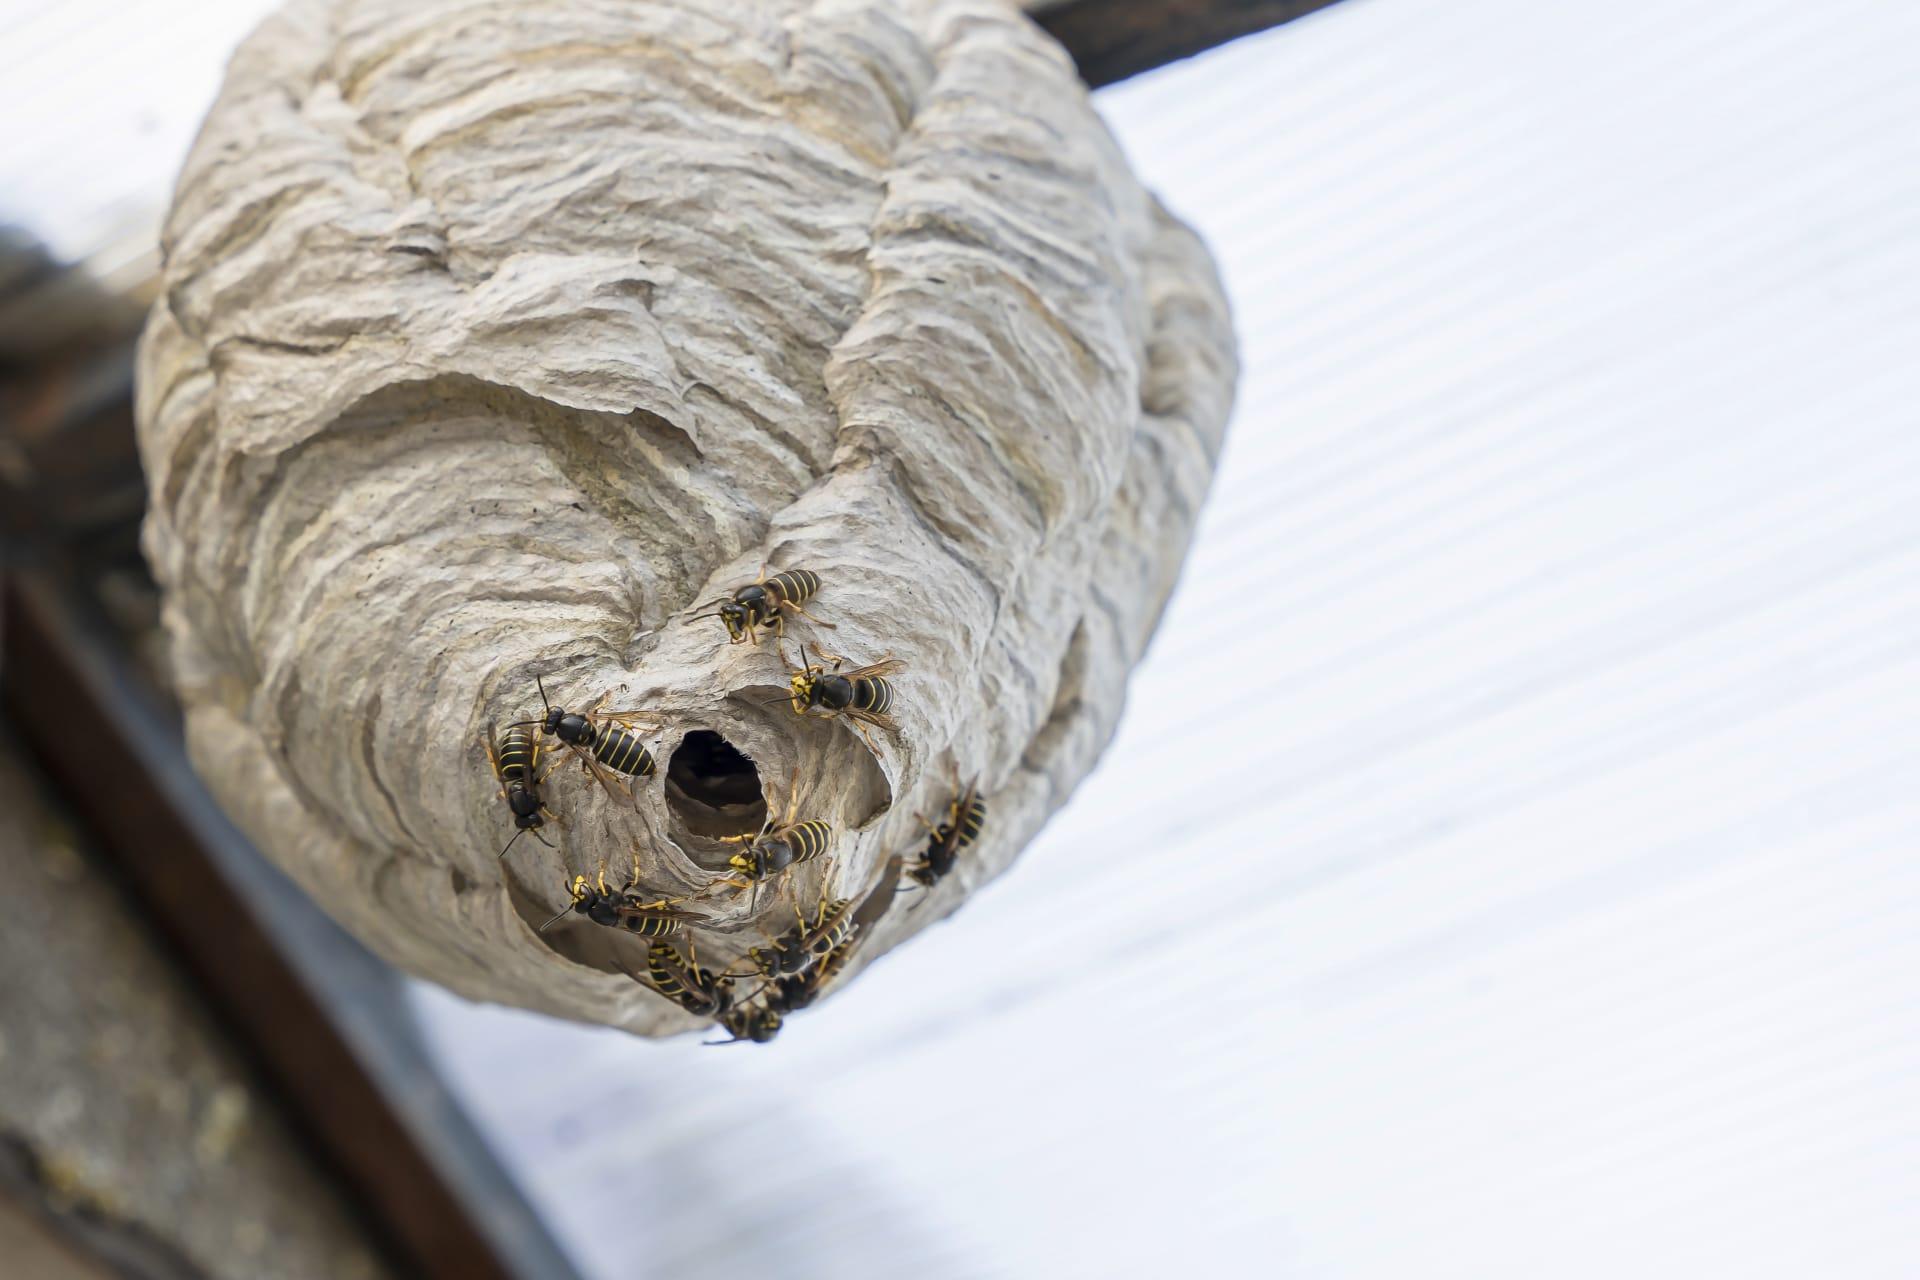 Bald faced hornet pictures